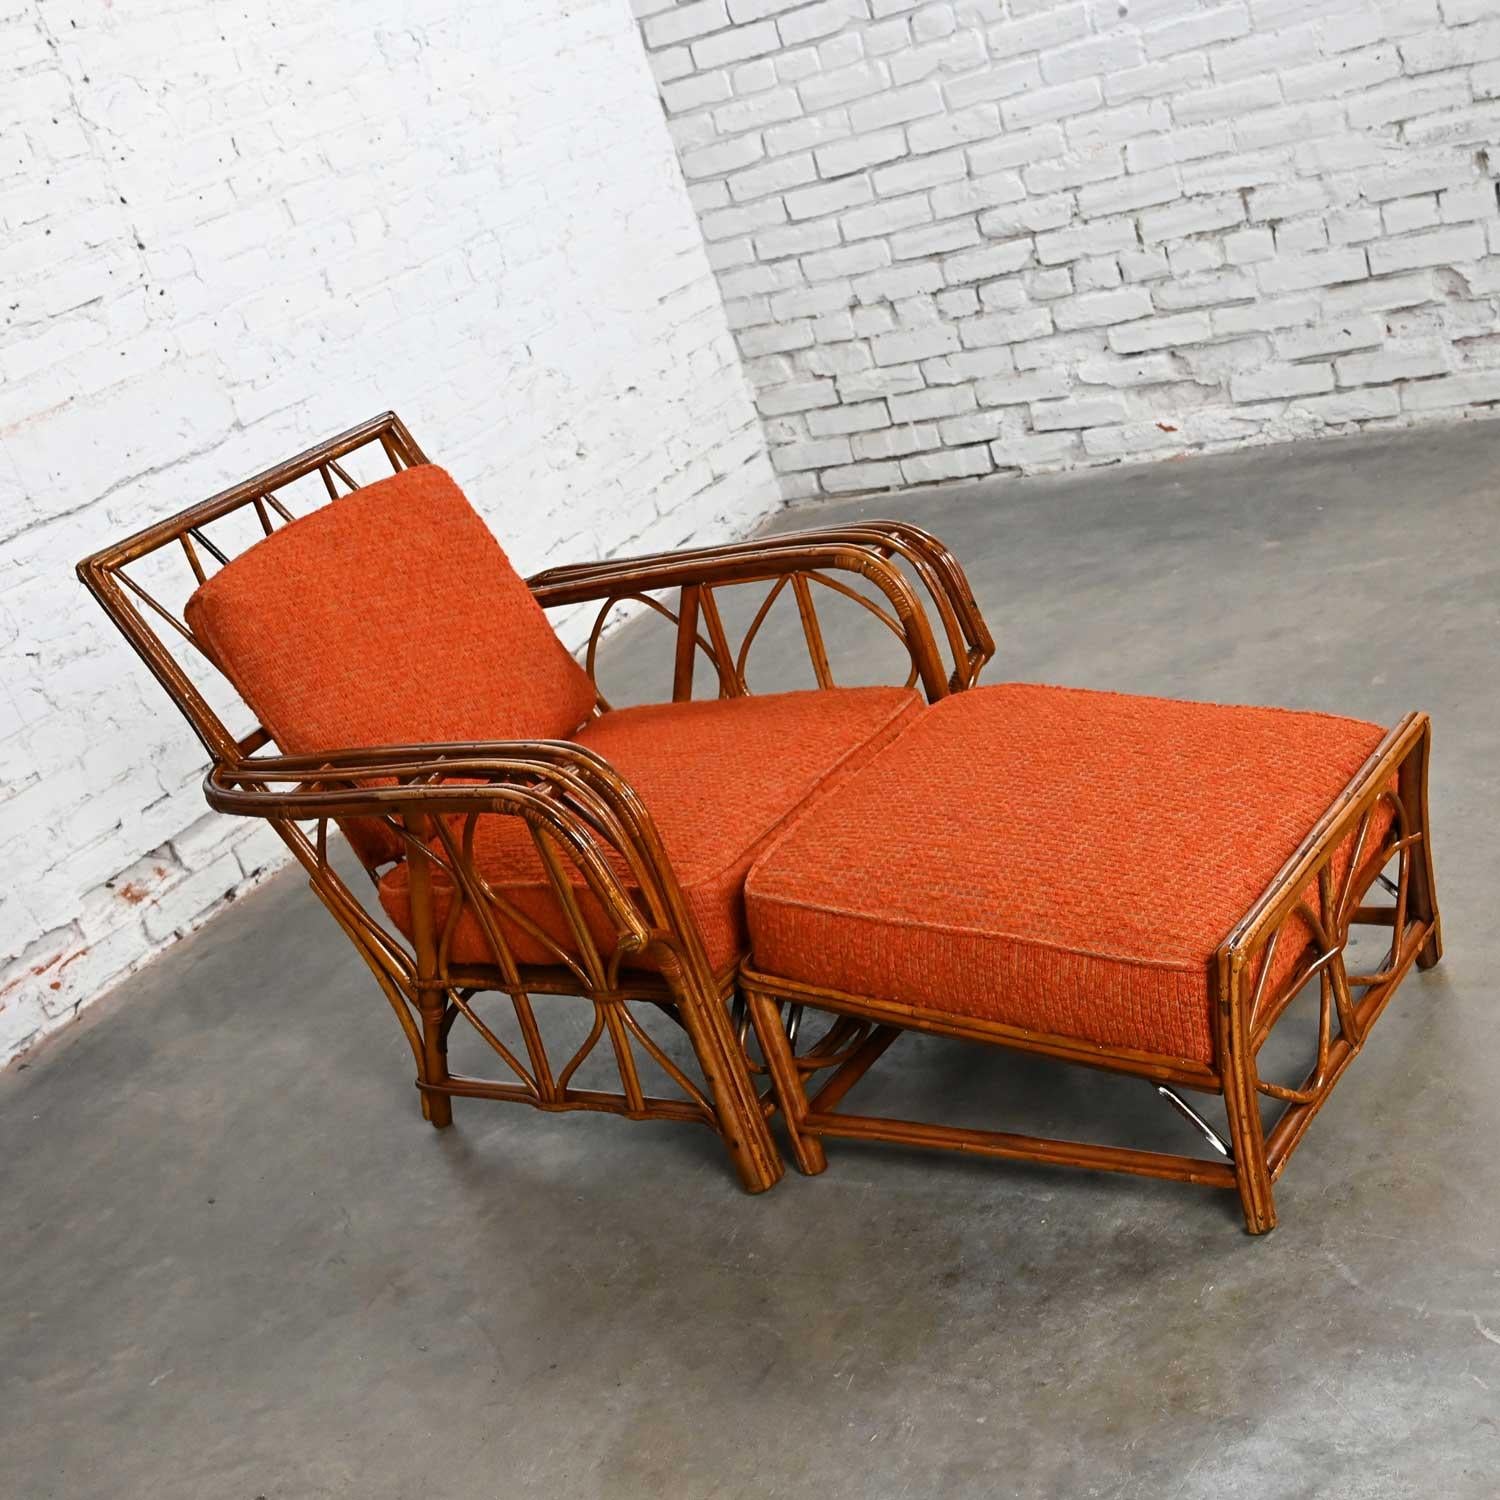 20th Century Rattan Lounge Chair & Ottoman Orange Fabric Cushions by Helmers Manufacturing Co